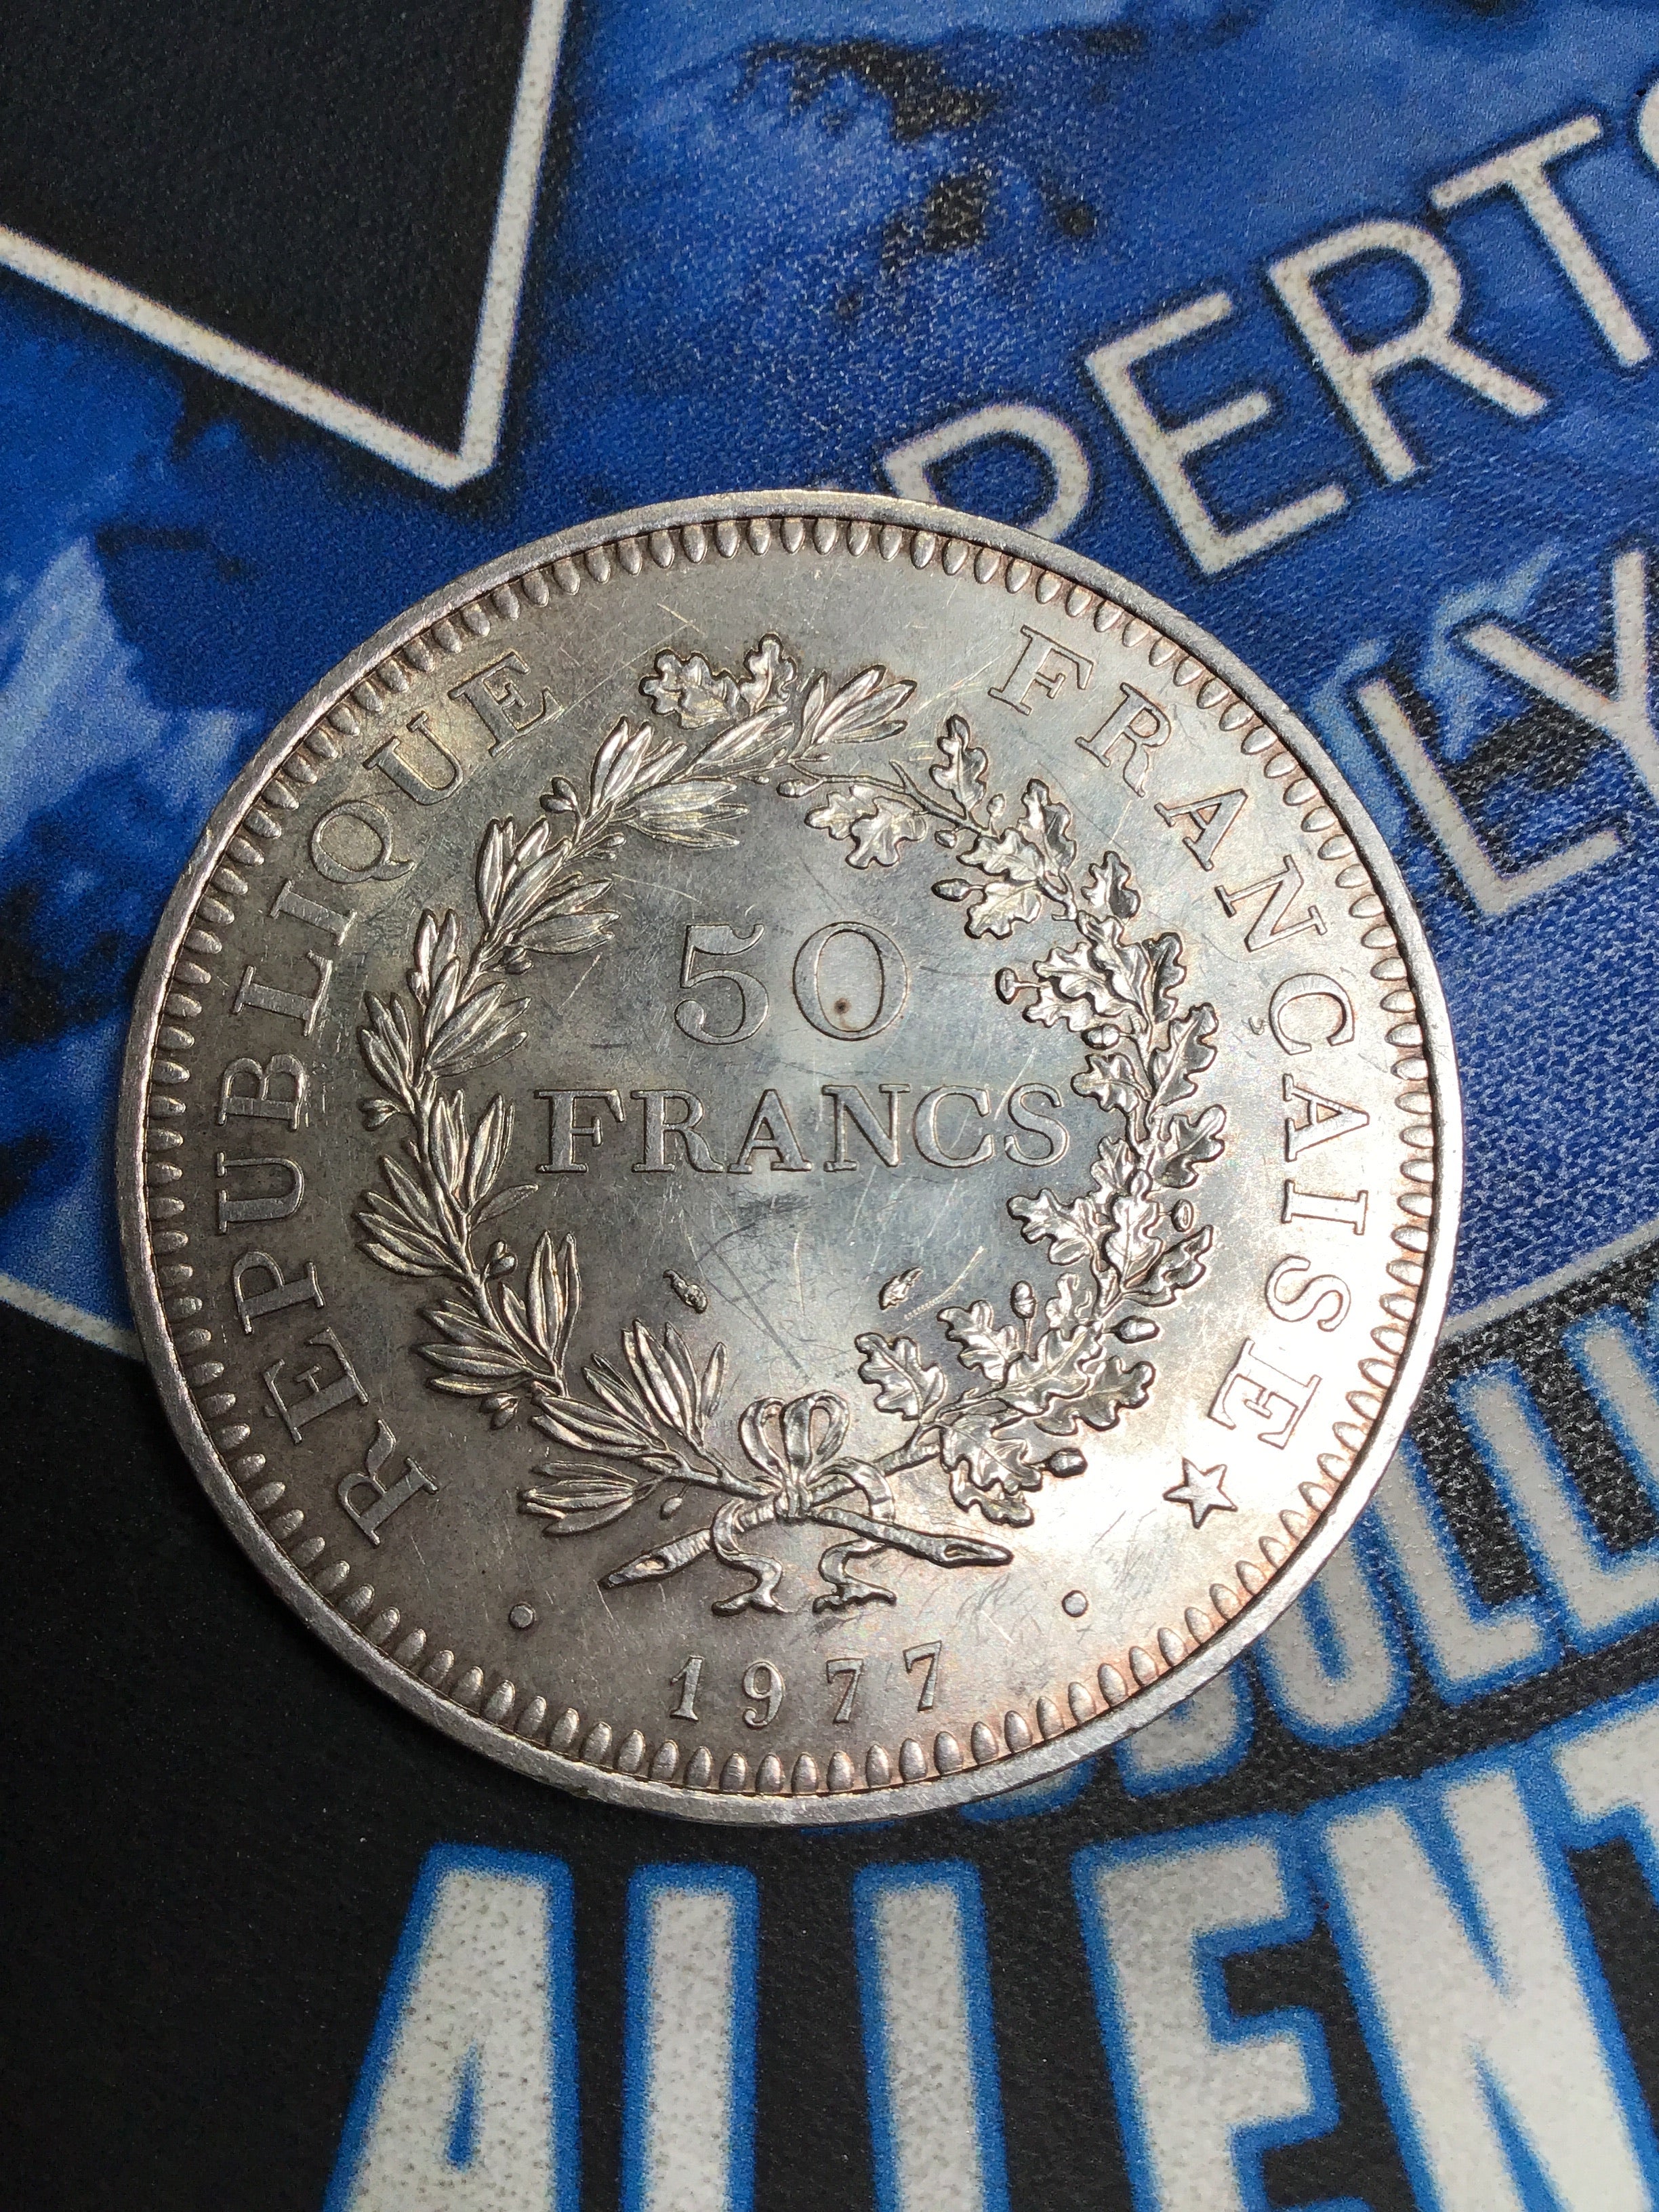 Gorgeous 1977 50 Francs - 90% Silver Coin